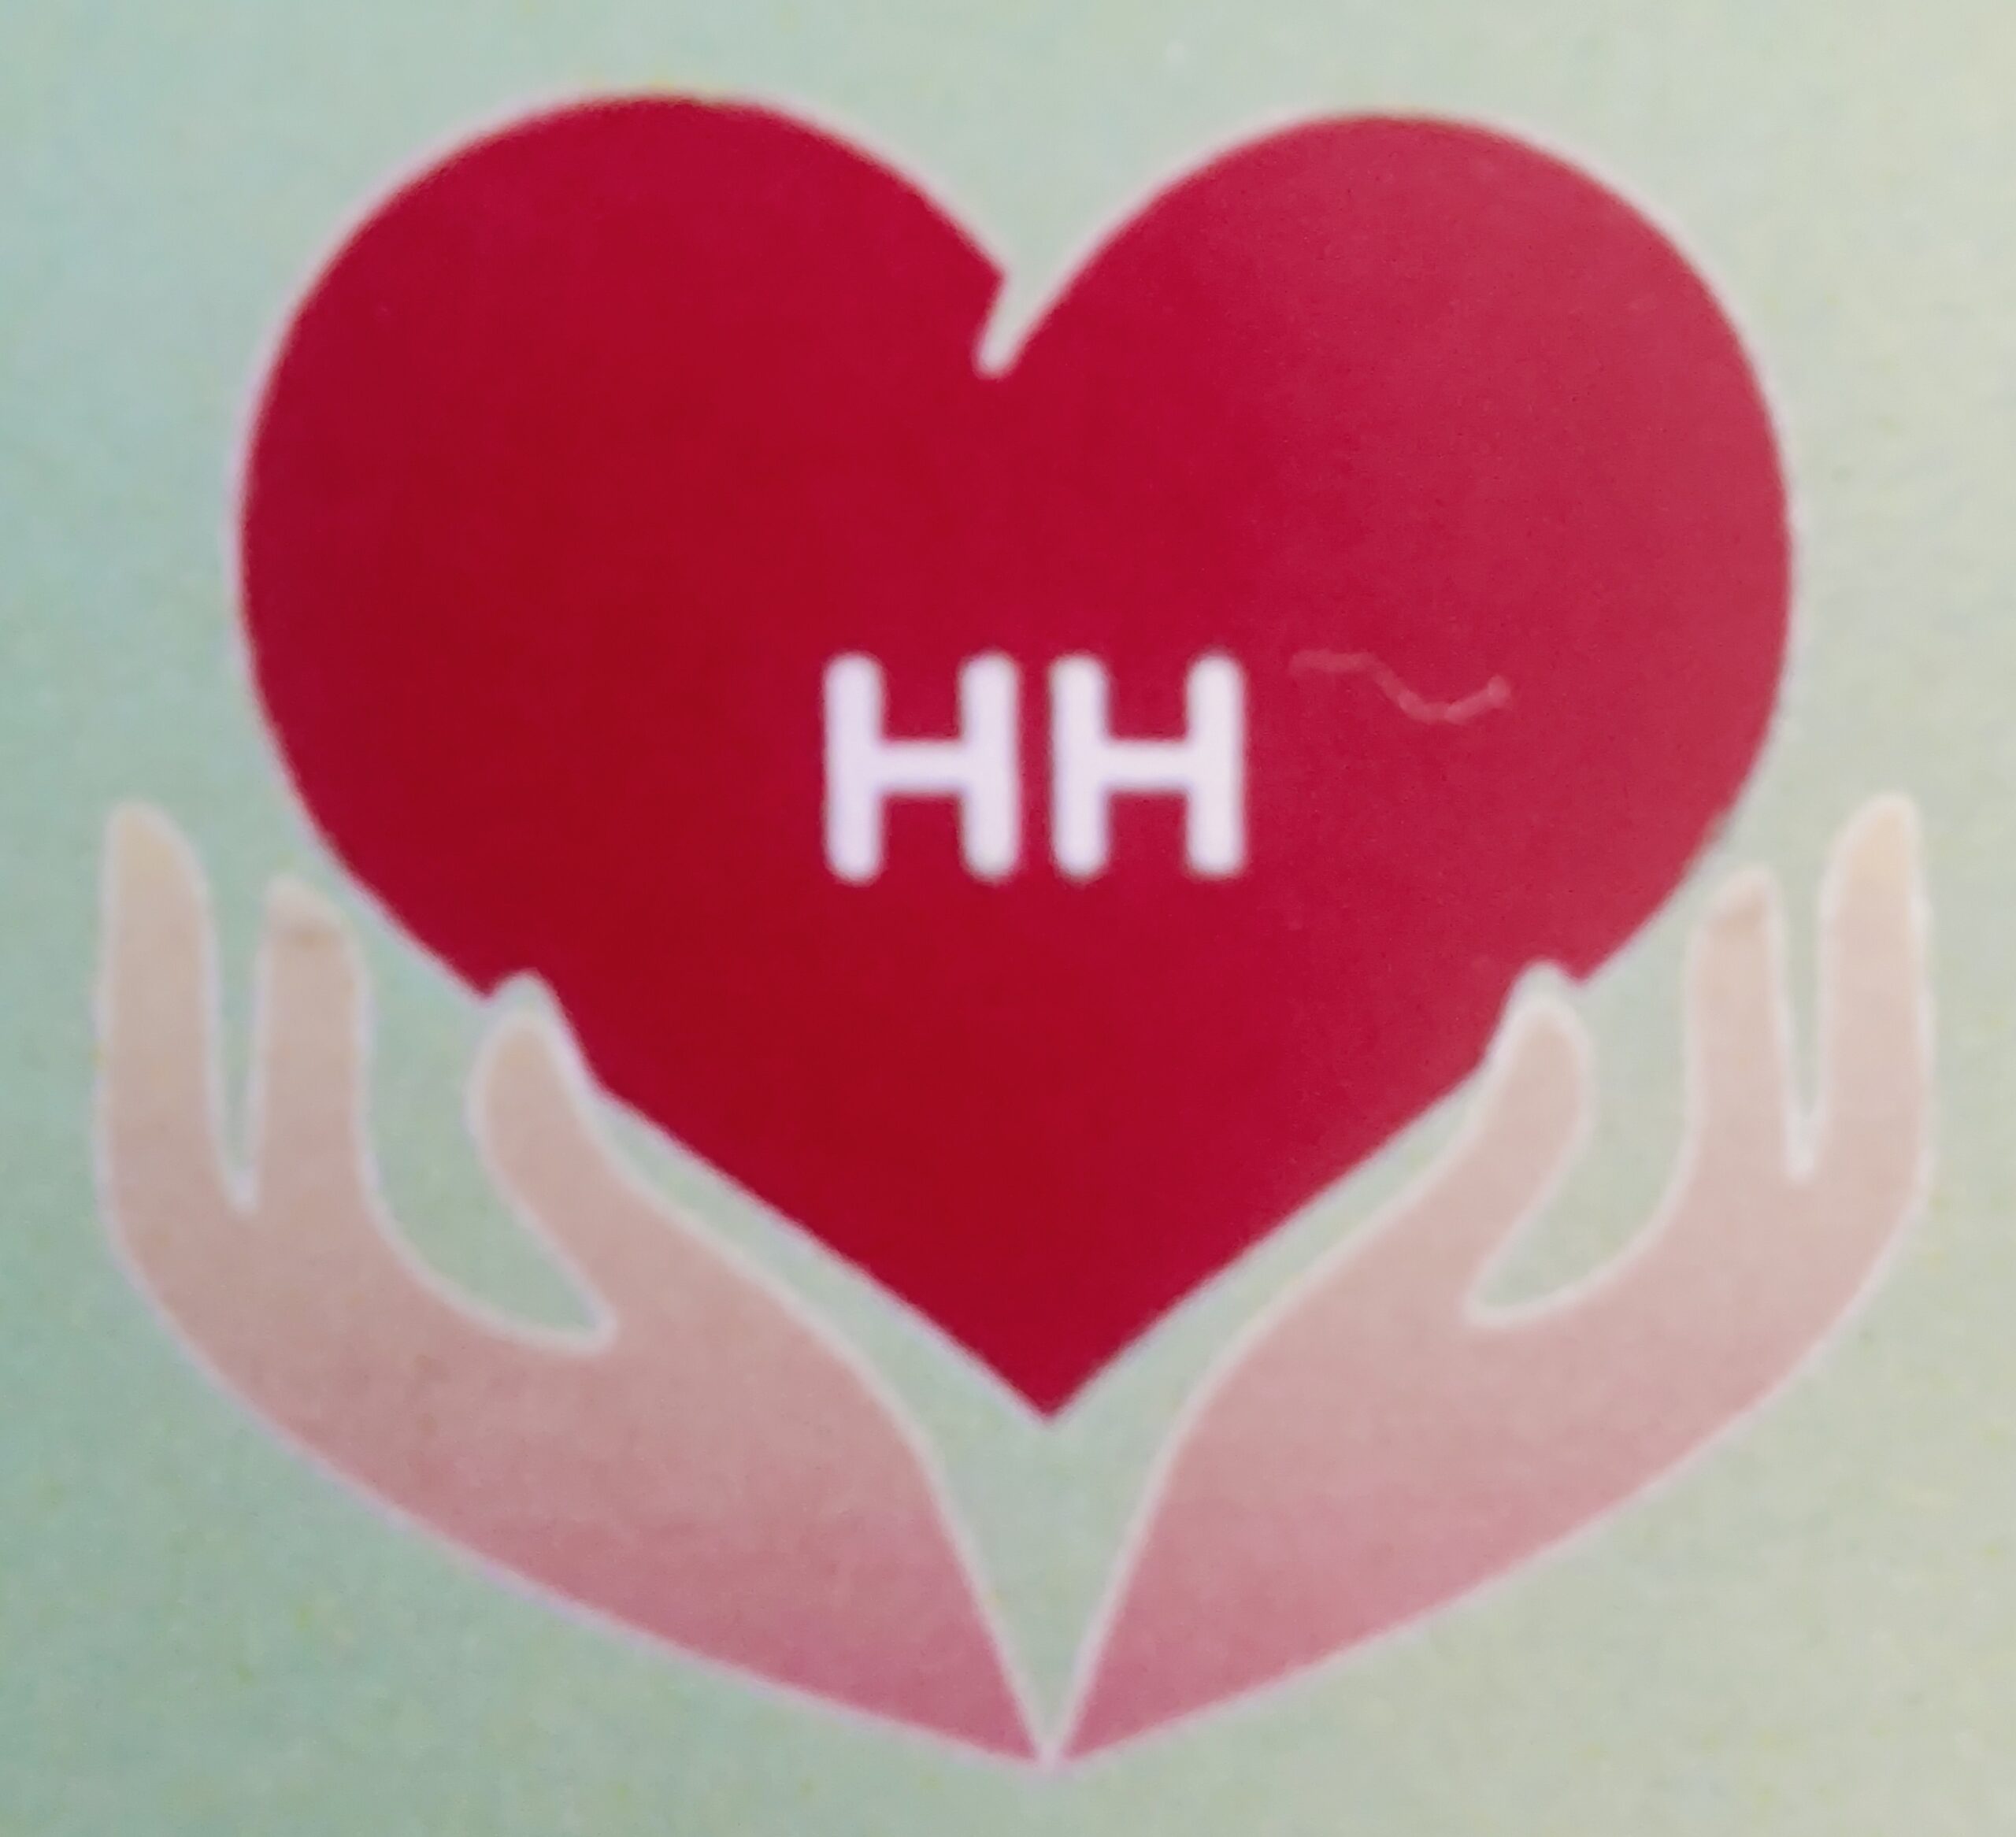 My company's initials are in the centre of the heart, this represents help harmony at home, help at heart